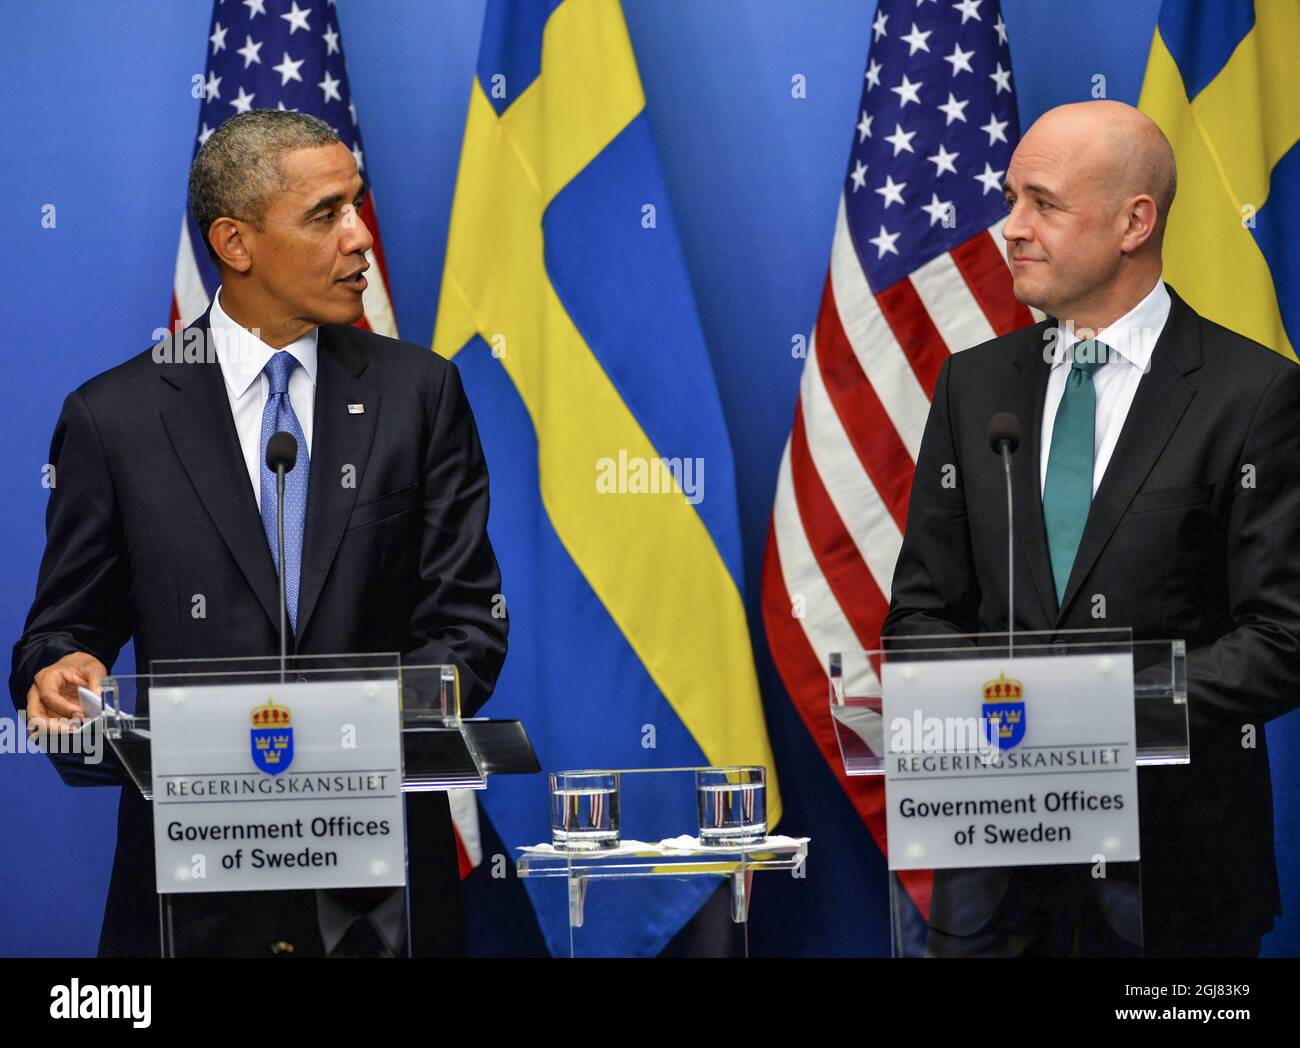 STOCKHOLM 20130904S US President Barack Obama and Swedish Prime Minister Fredrik Reinfeldt during the press conference at the Government offices in Stockholm, Sweden, September 4, 2013. President Obama is in Sweden for bilateral talks prior to a G20 summit in Russia. Foto Jonas Ekstromer / SCANPIX kod 10030  Stock Photo